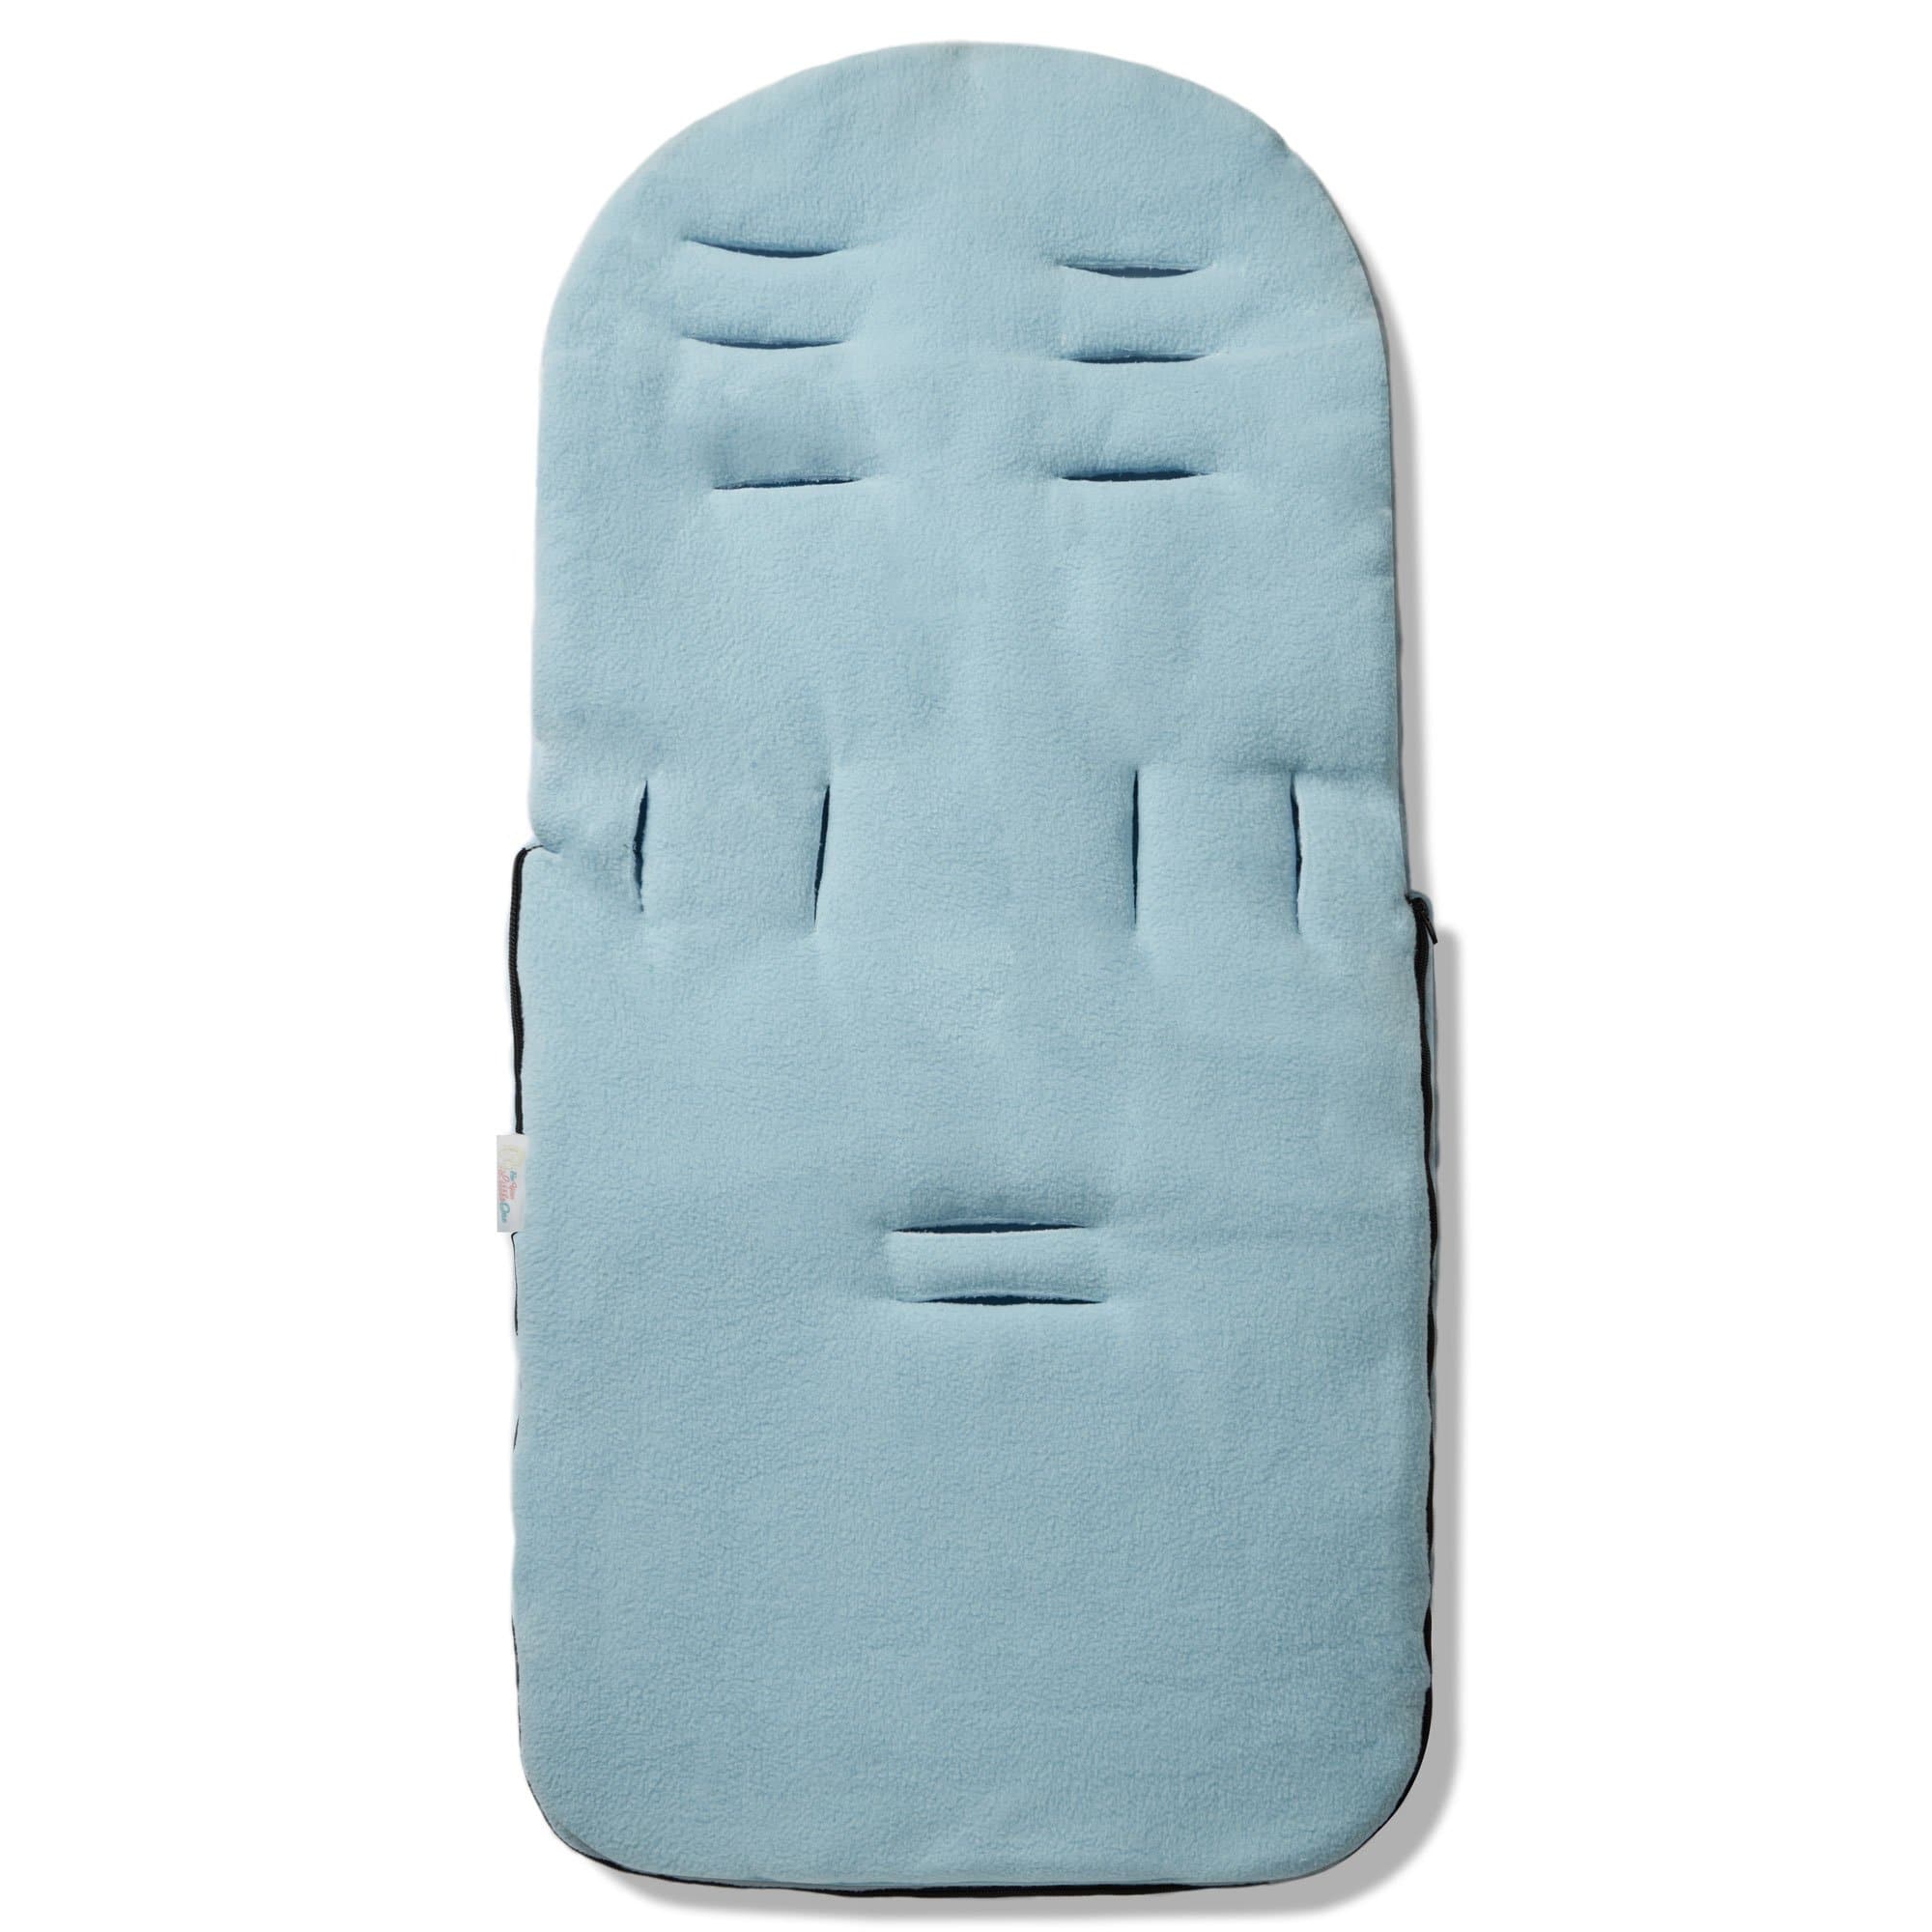 Dimple Footmuff / Cosy Toes Compatible with XTS - For Your Little One